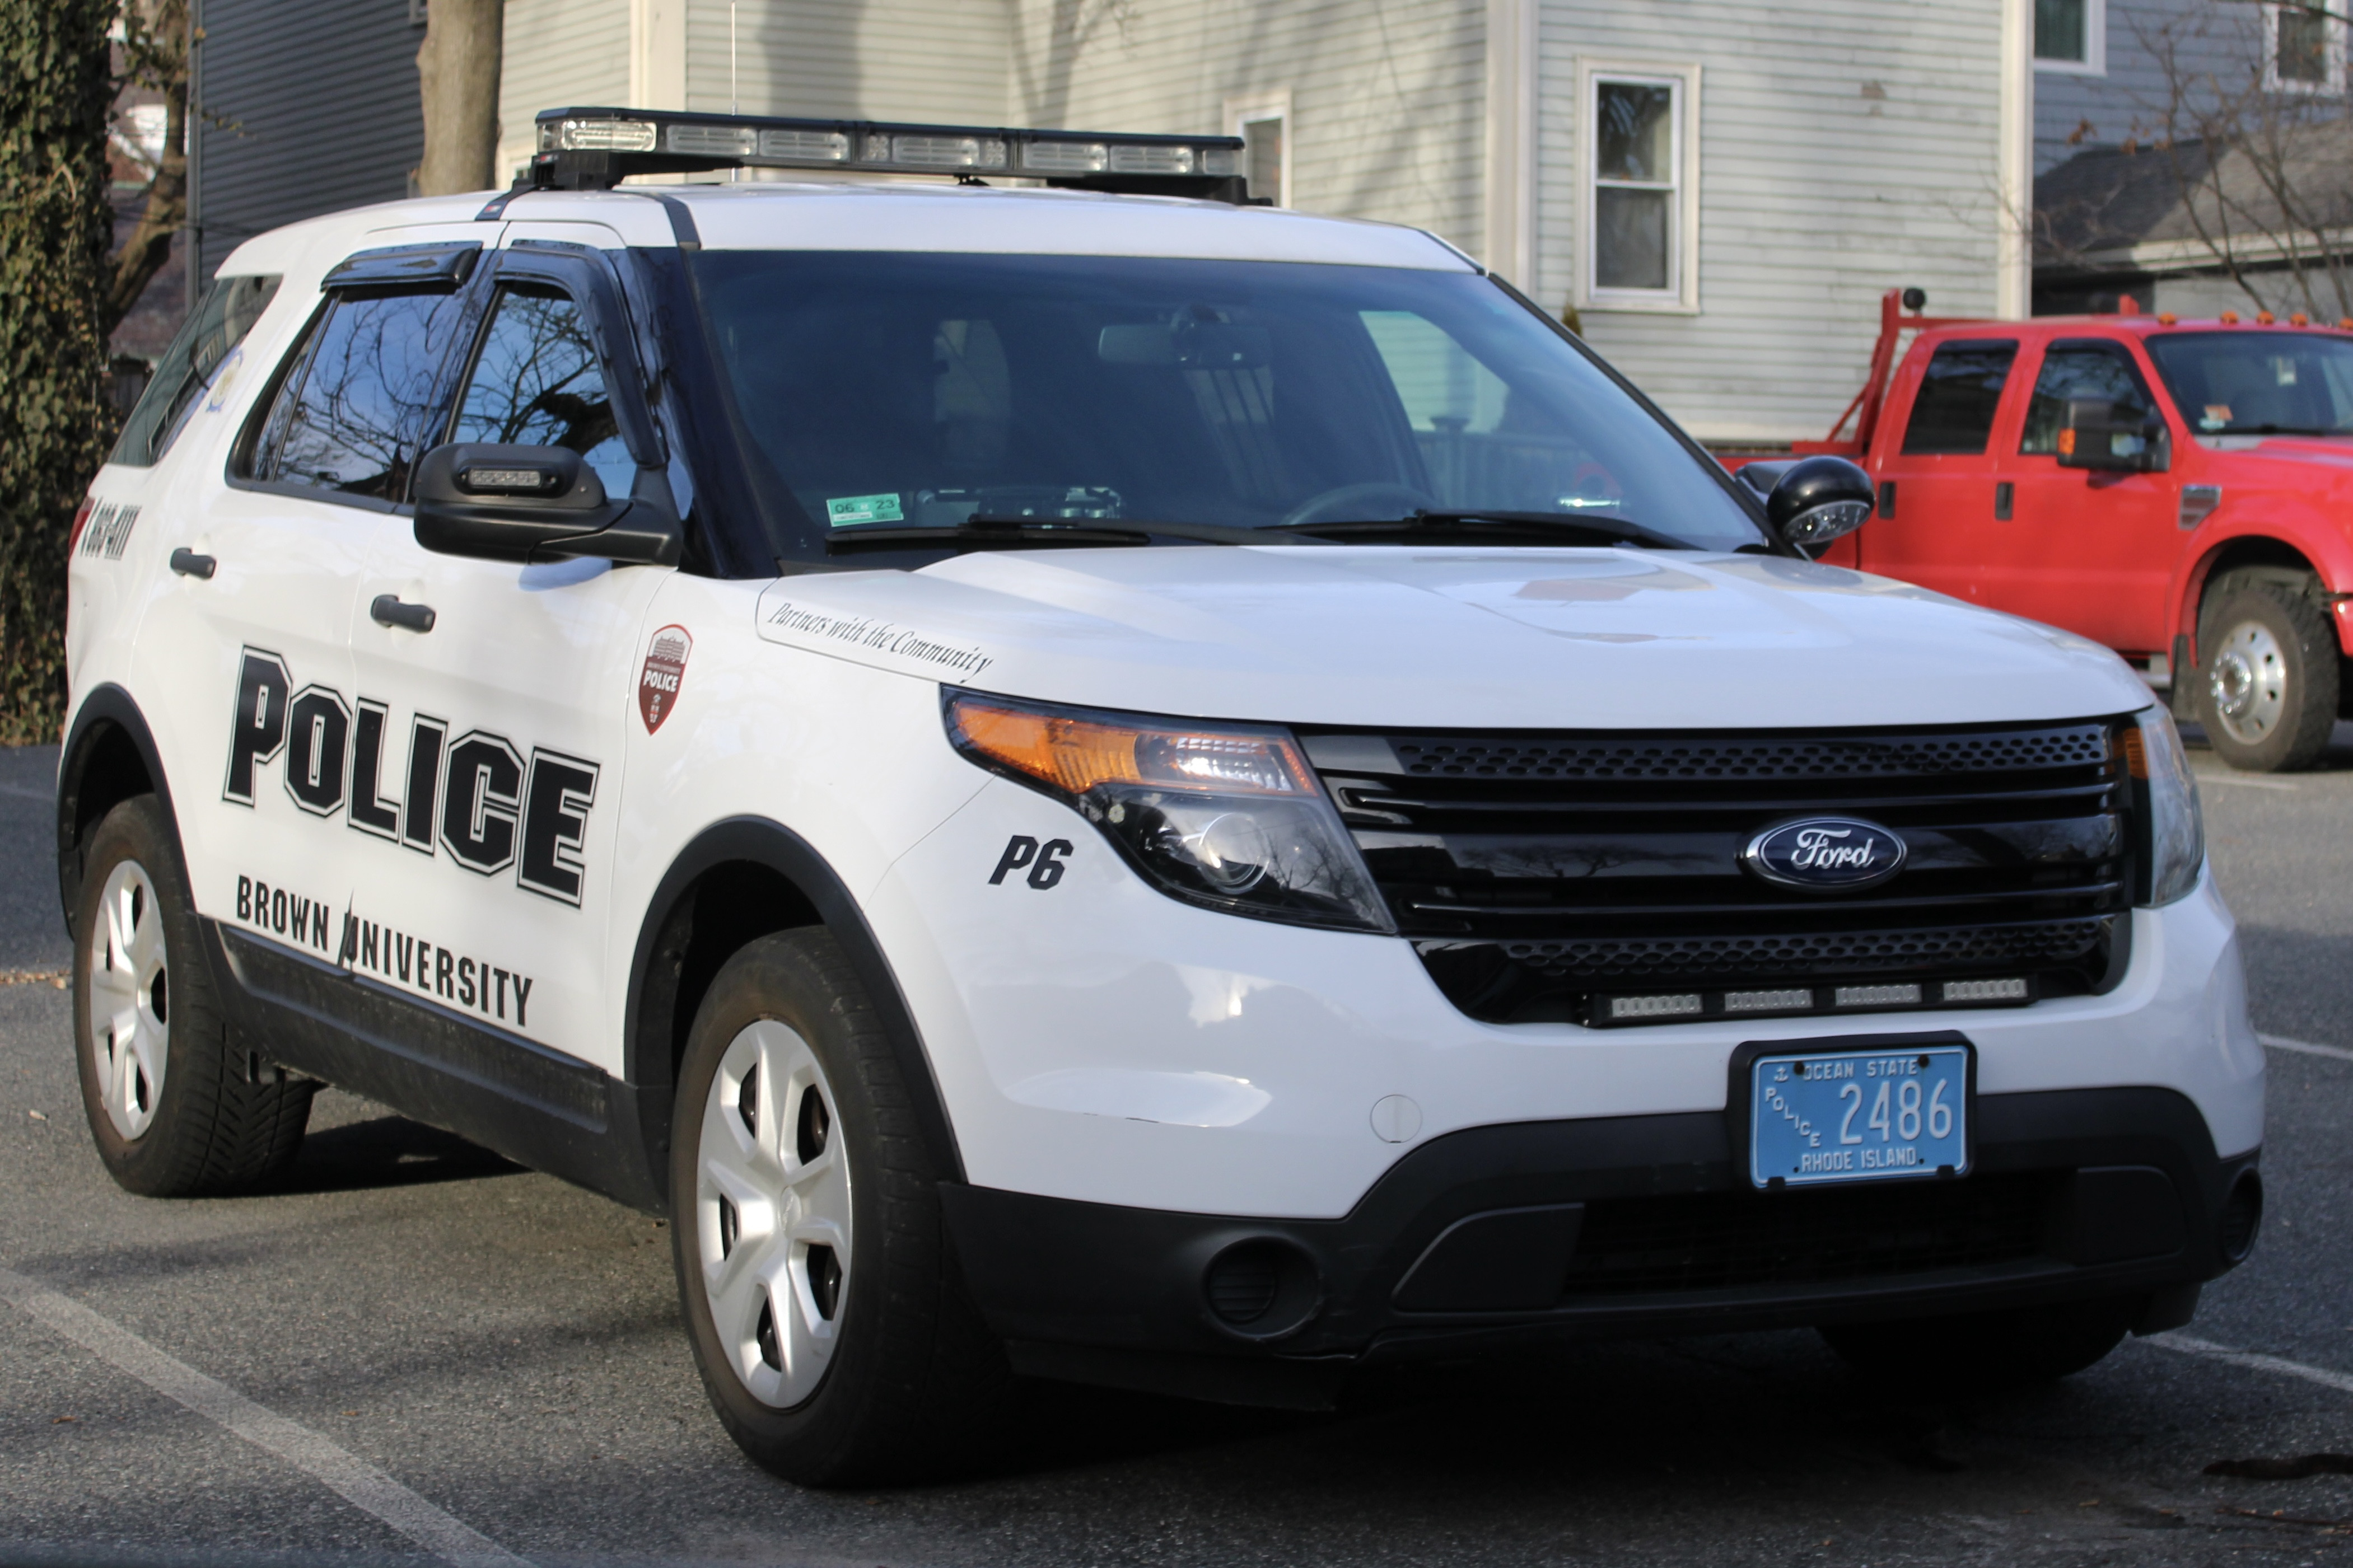 A photo  of Brown University Police
            Patrol 6, a 2015 Ford Police Interceptor Utility             taken by @riemergencyvehicles